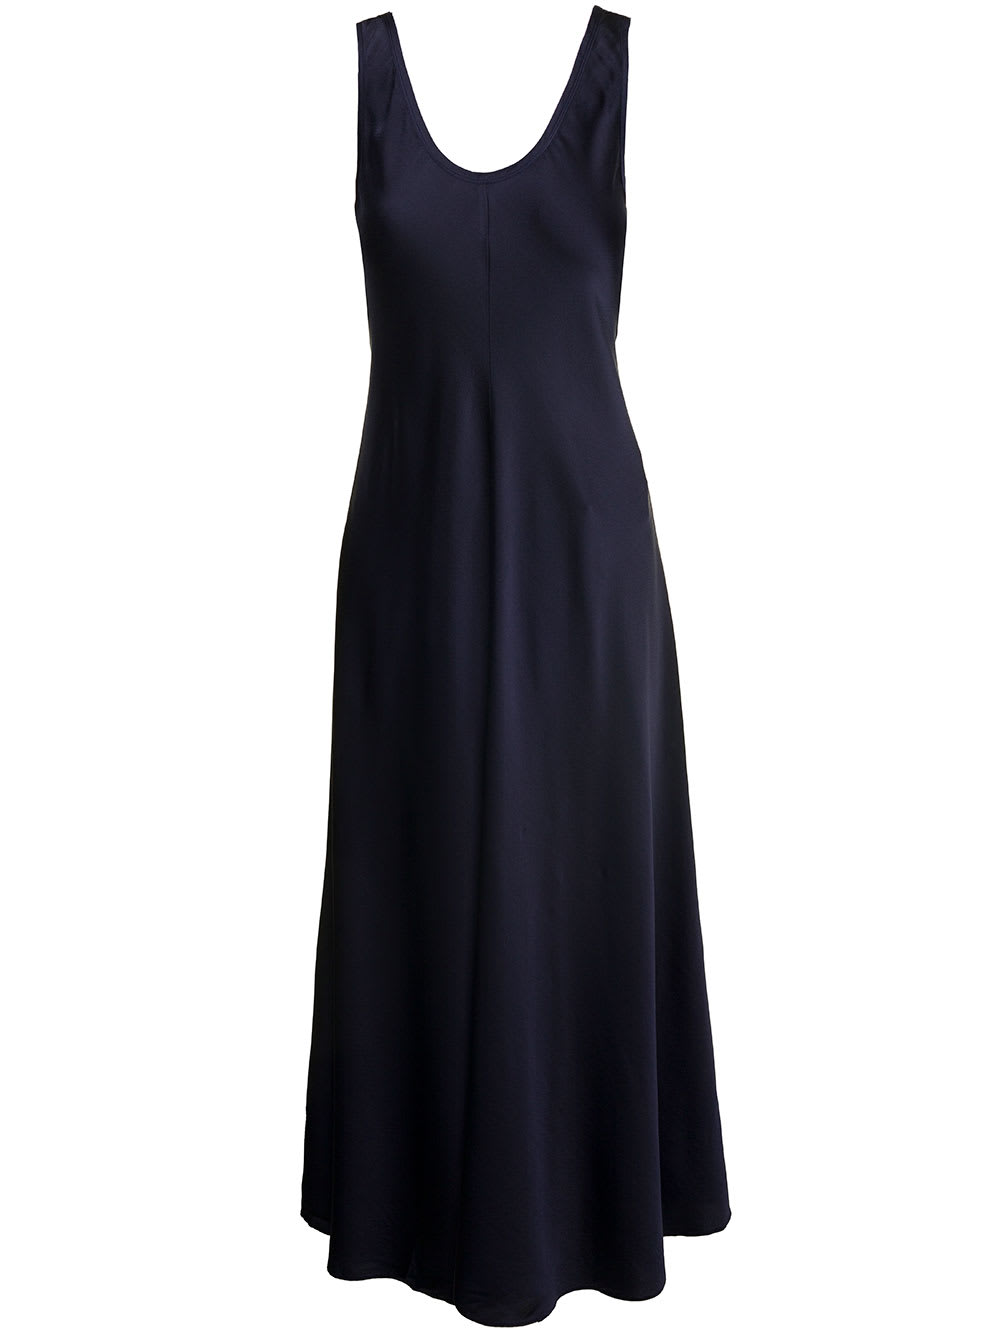 FORTE FORTE LONG DARK BLUE SLEEVELESS DRESS WITH FLARED SKIRT IN STRETCH SILK WOMAN